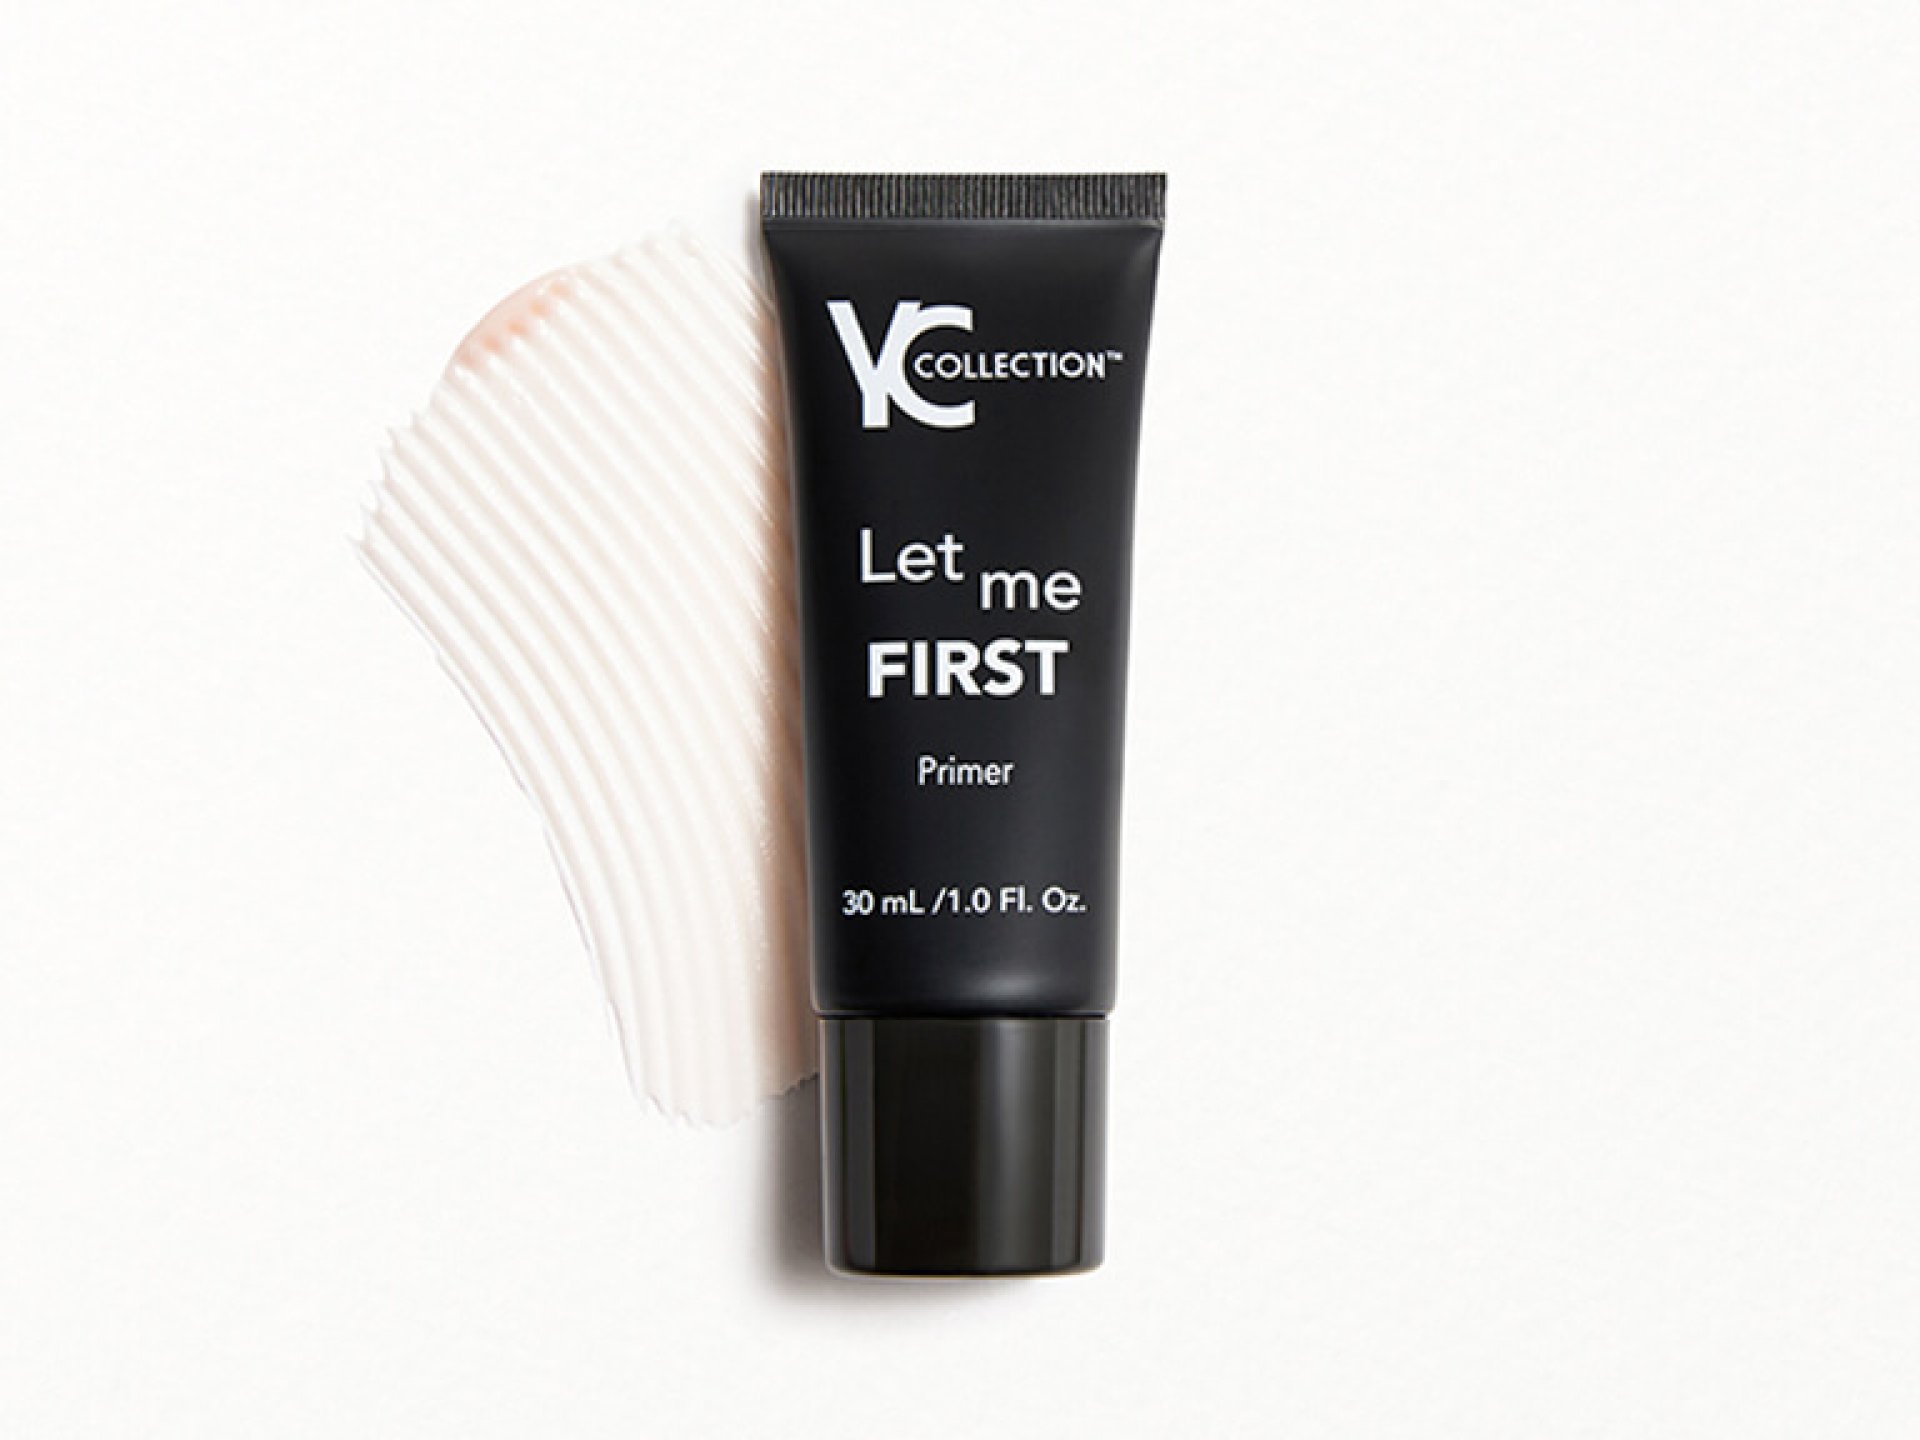 YC COLLECTION Let Me First Primer